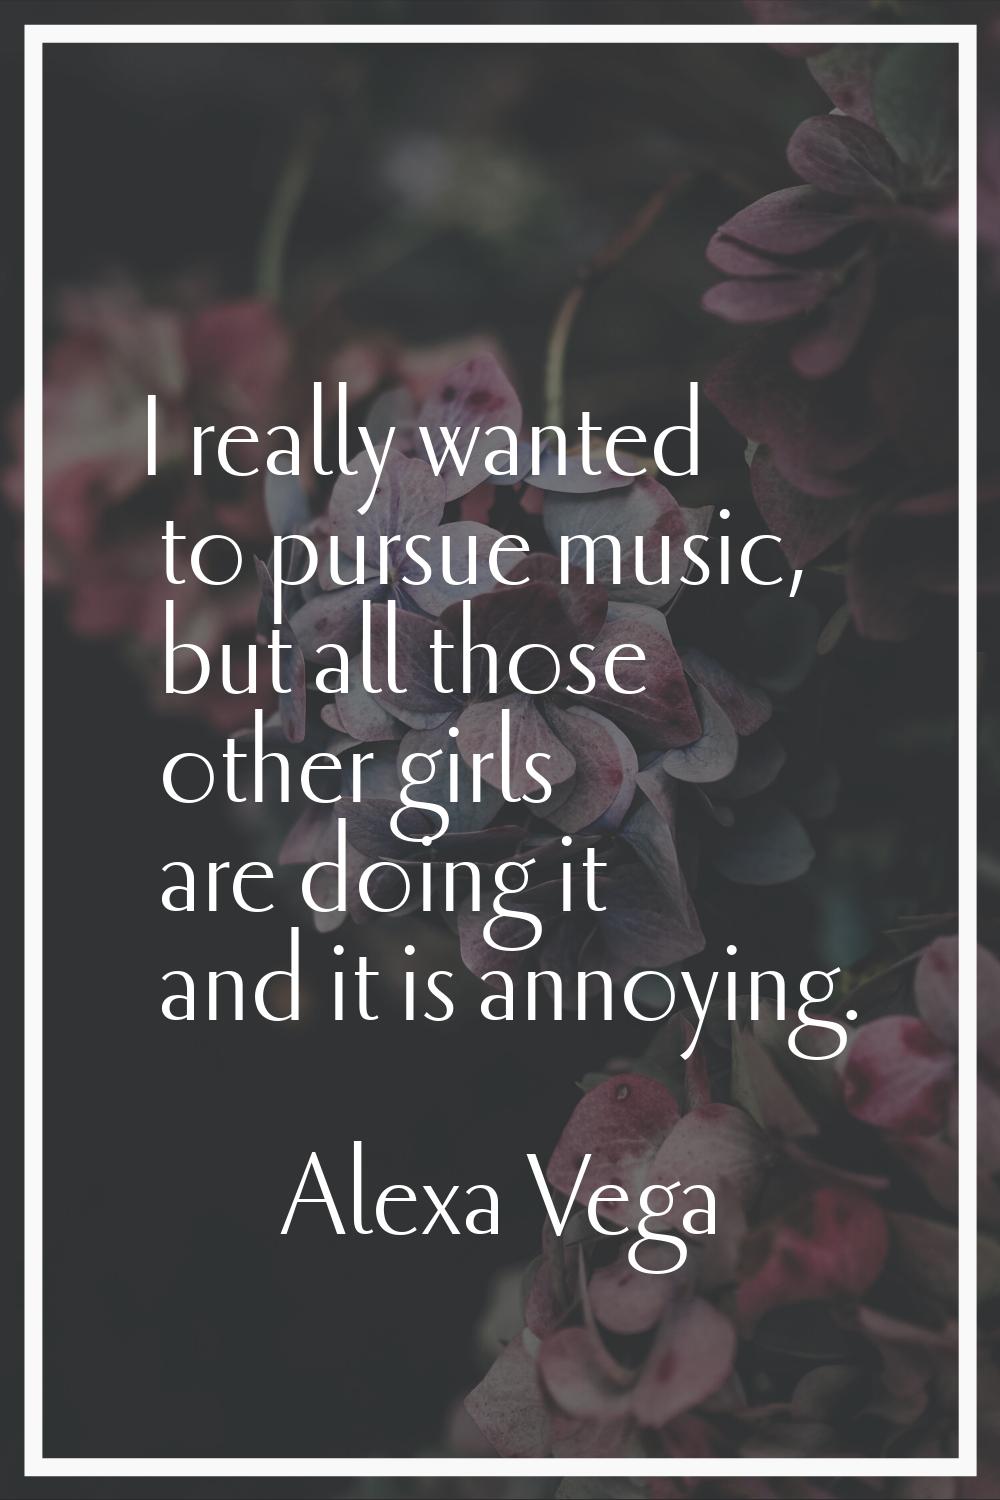 I really wanted to pursue music, but all those other girls are doing it and it is annoying.